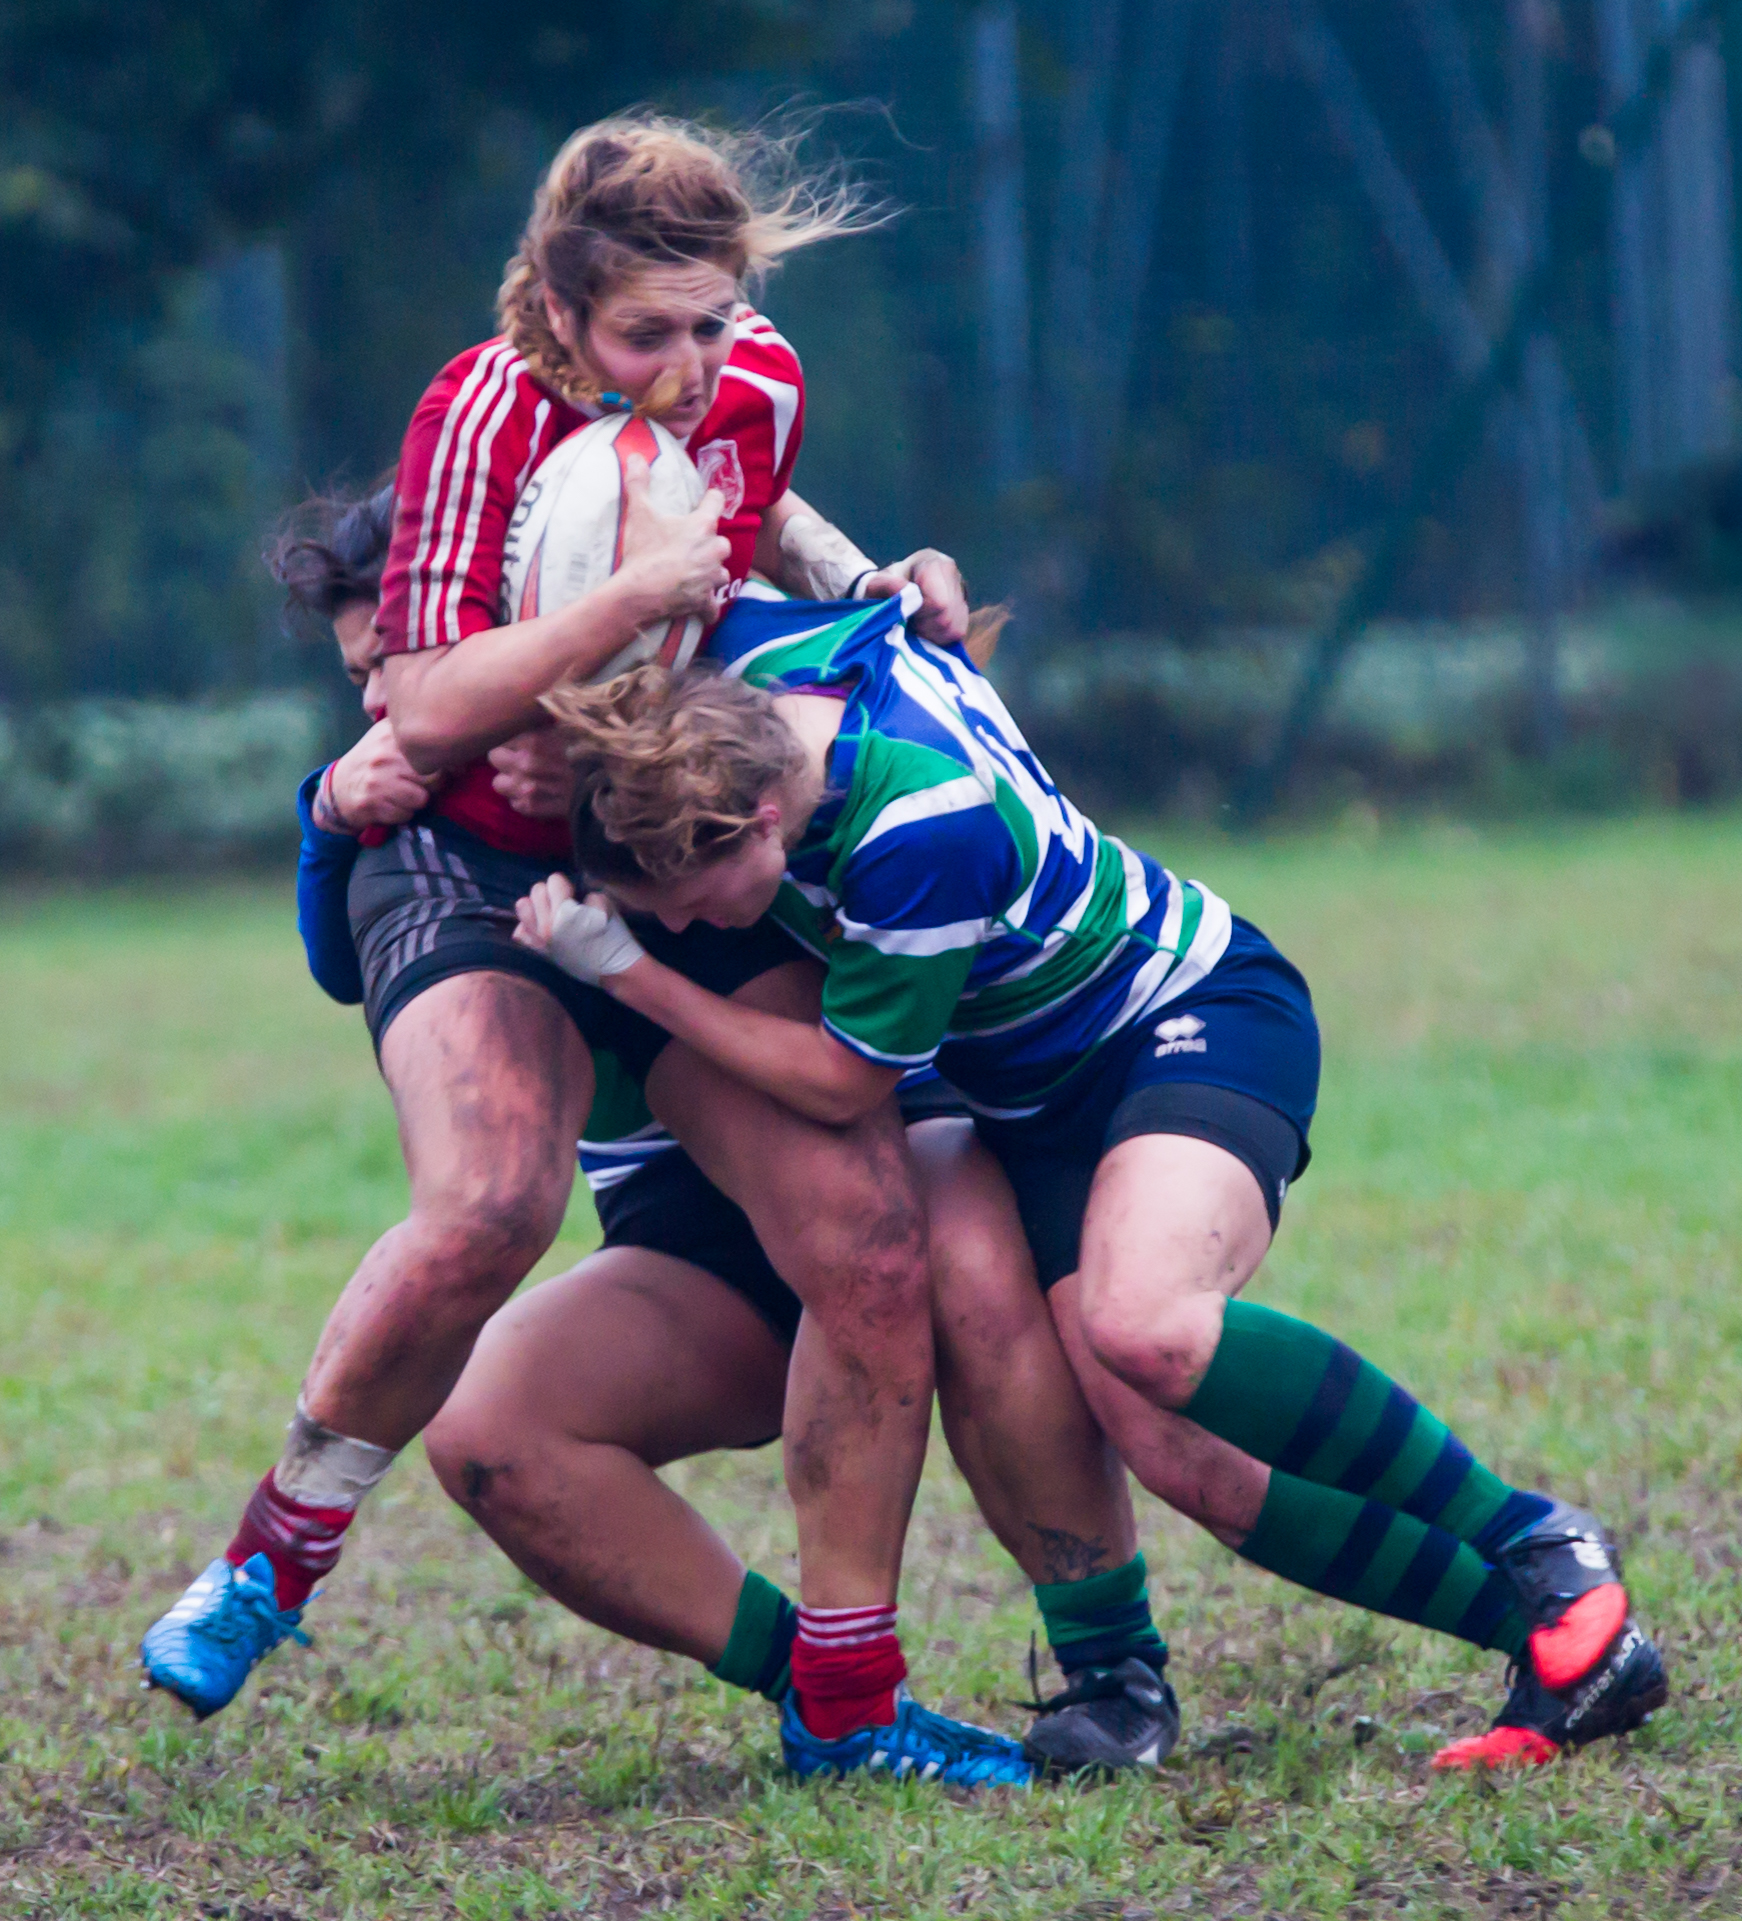 Rugby female. That determination!...